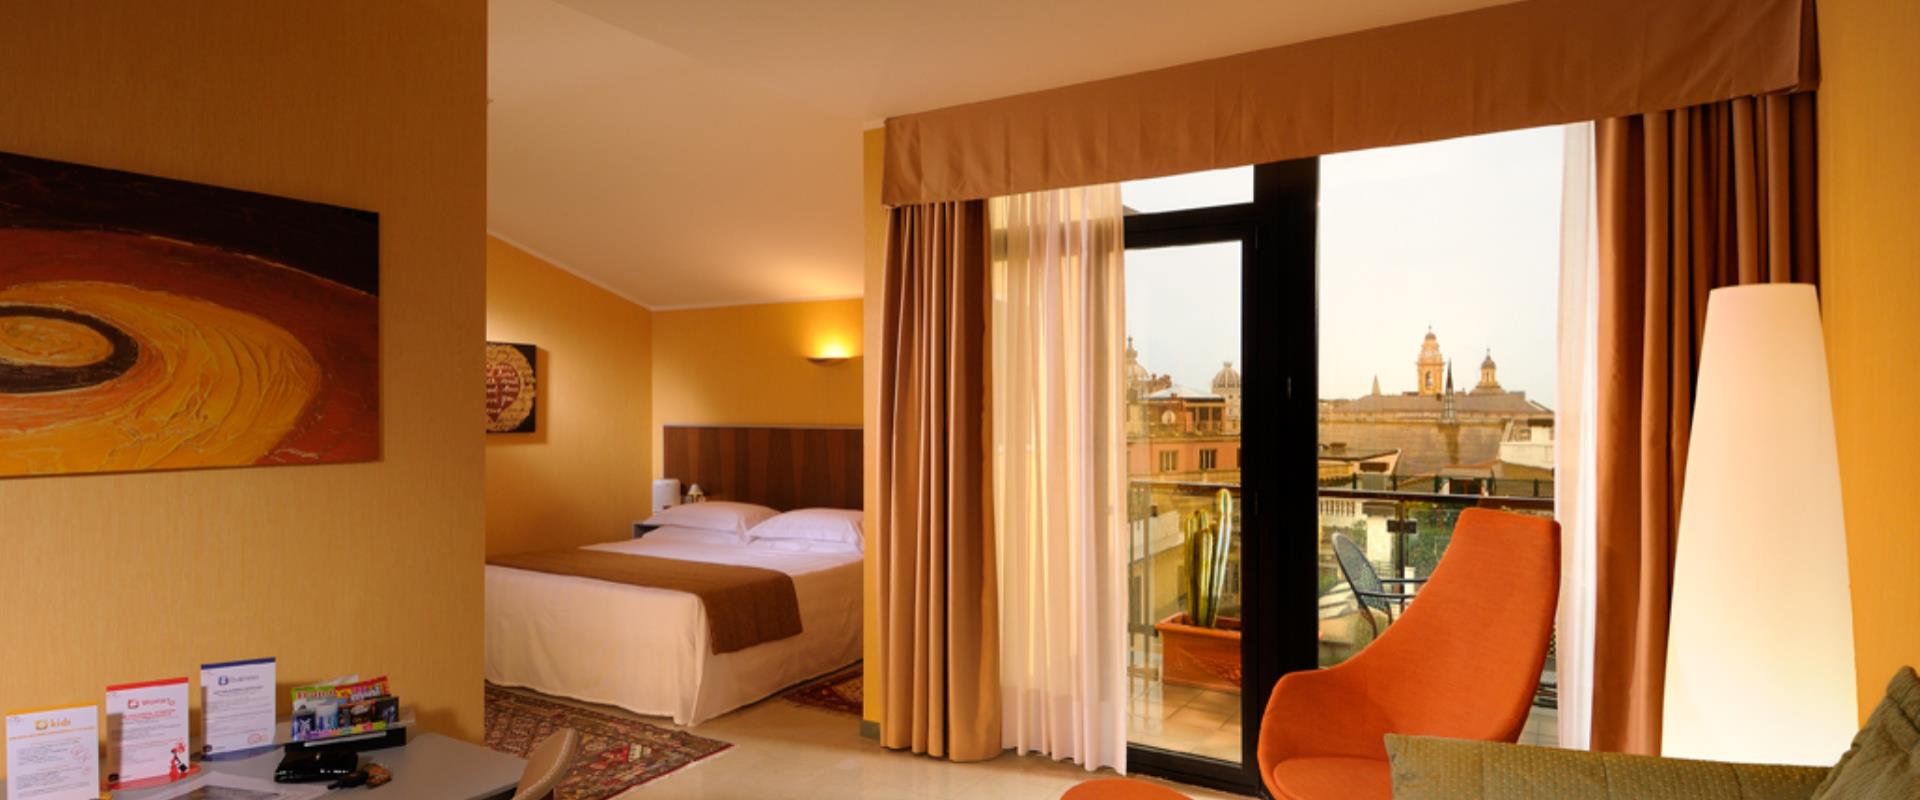 Book your stay at Best Western Plus City Hotel in Genoa and discover our beautiful Suite with panoramic terrace